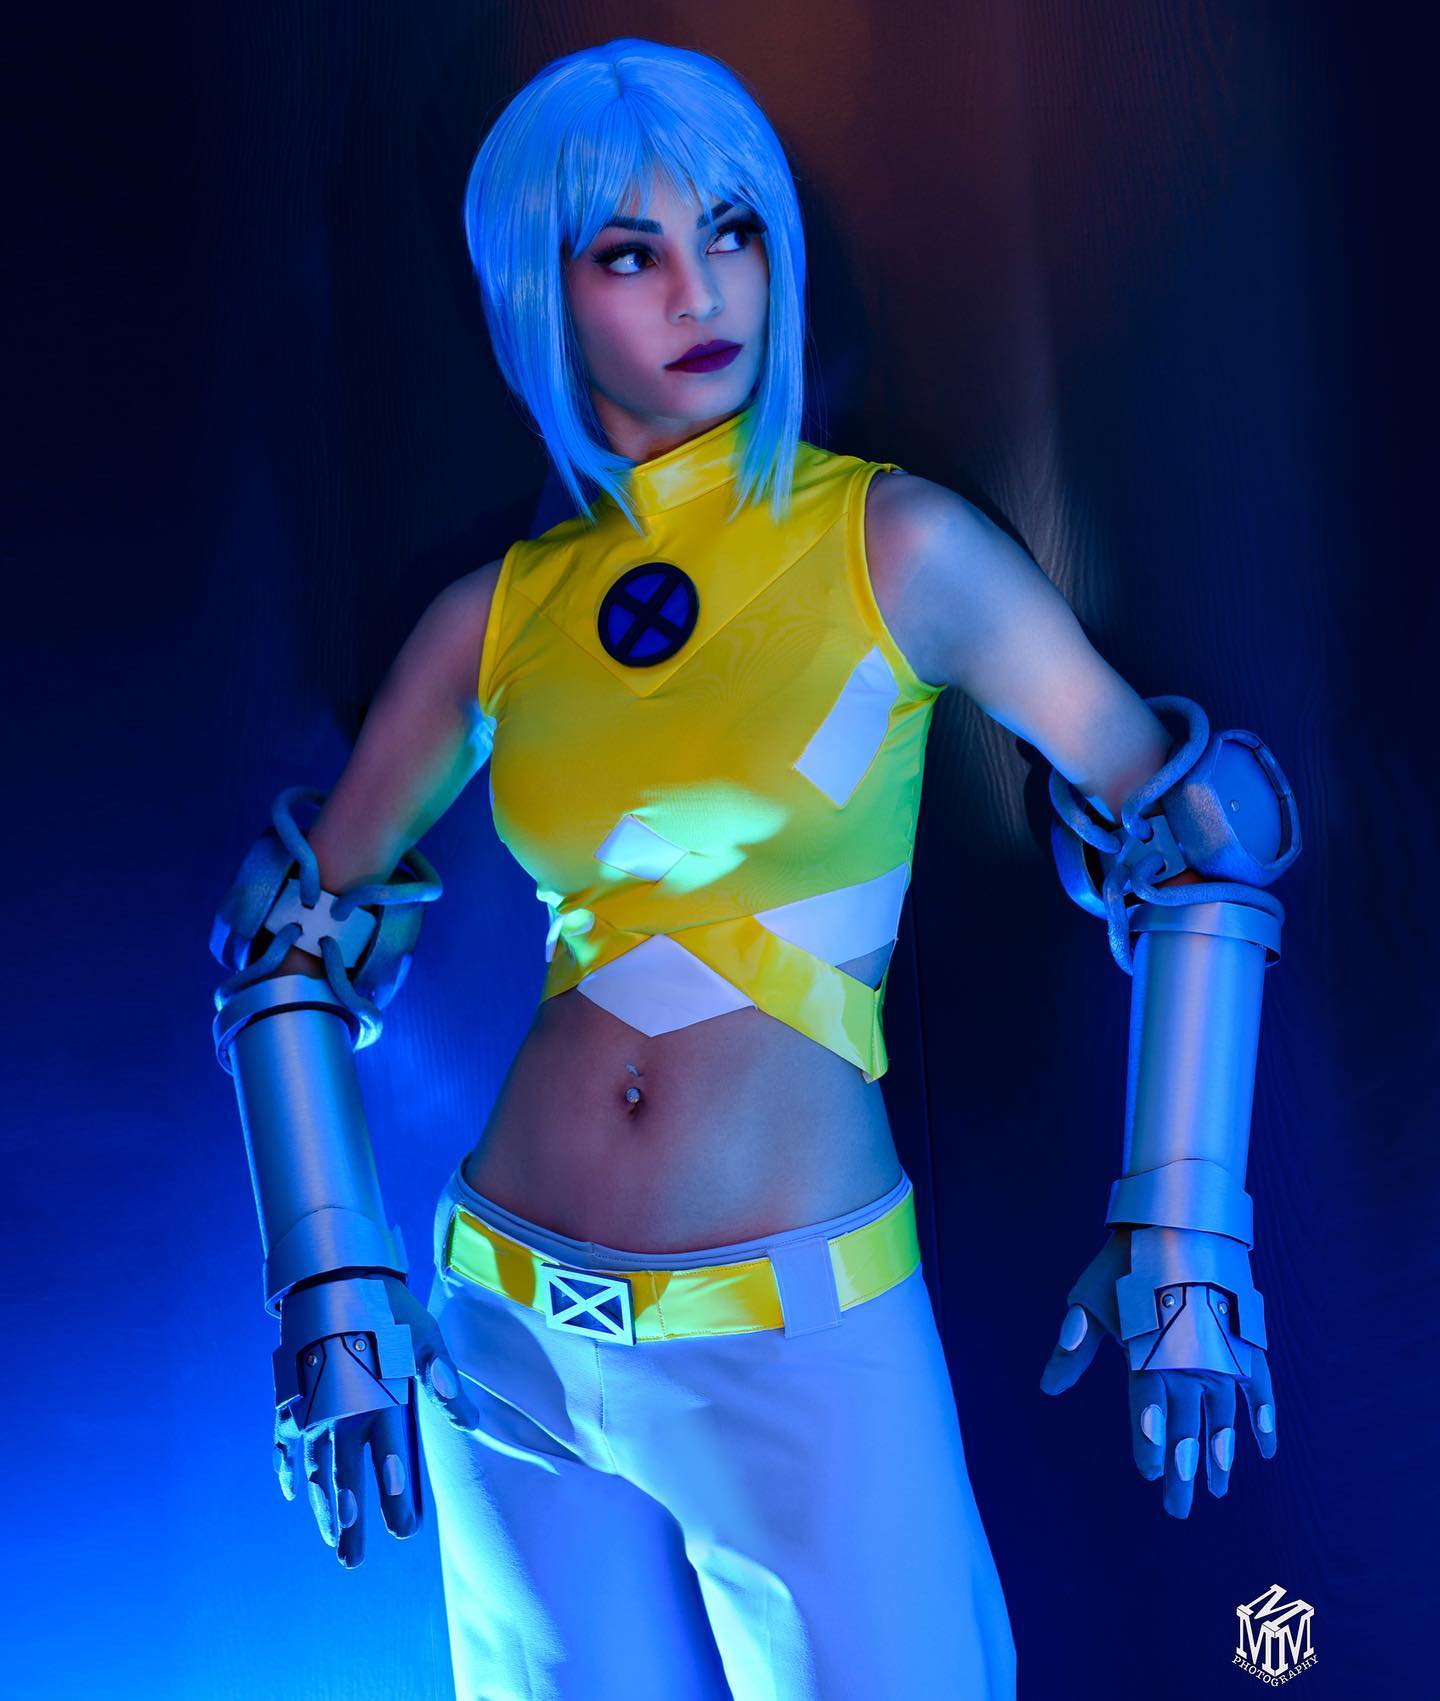 SURGE ⚡️NORIKO ASHIDA is here! This is her debut uniform in New X-Men and was so fun and challenging to make! 

Fun facts: 1️⃣The vinyl is the same I used for my Gen X Monet! 2️⃣This wig was cut on a ring light because I couldn’t find my styling head 🤪

Photos by @m3_photo 

#surgexmen #xmensurge #norikoashida #xmencosplay #newxmen #cosplaygirl #cosplayphotography #cosplayofinstagram #cosplayofig #xmen #bluehair #saramonicosplay #saramoni #krakoaisforallmutants